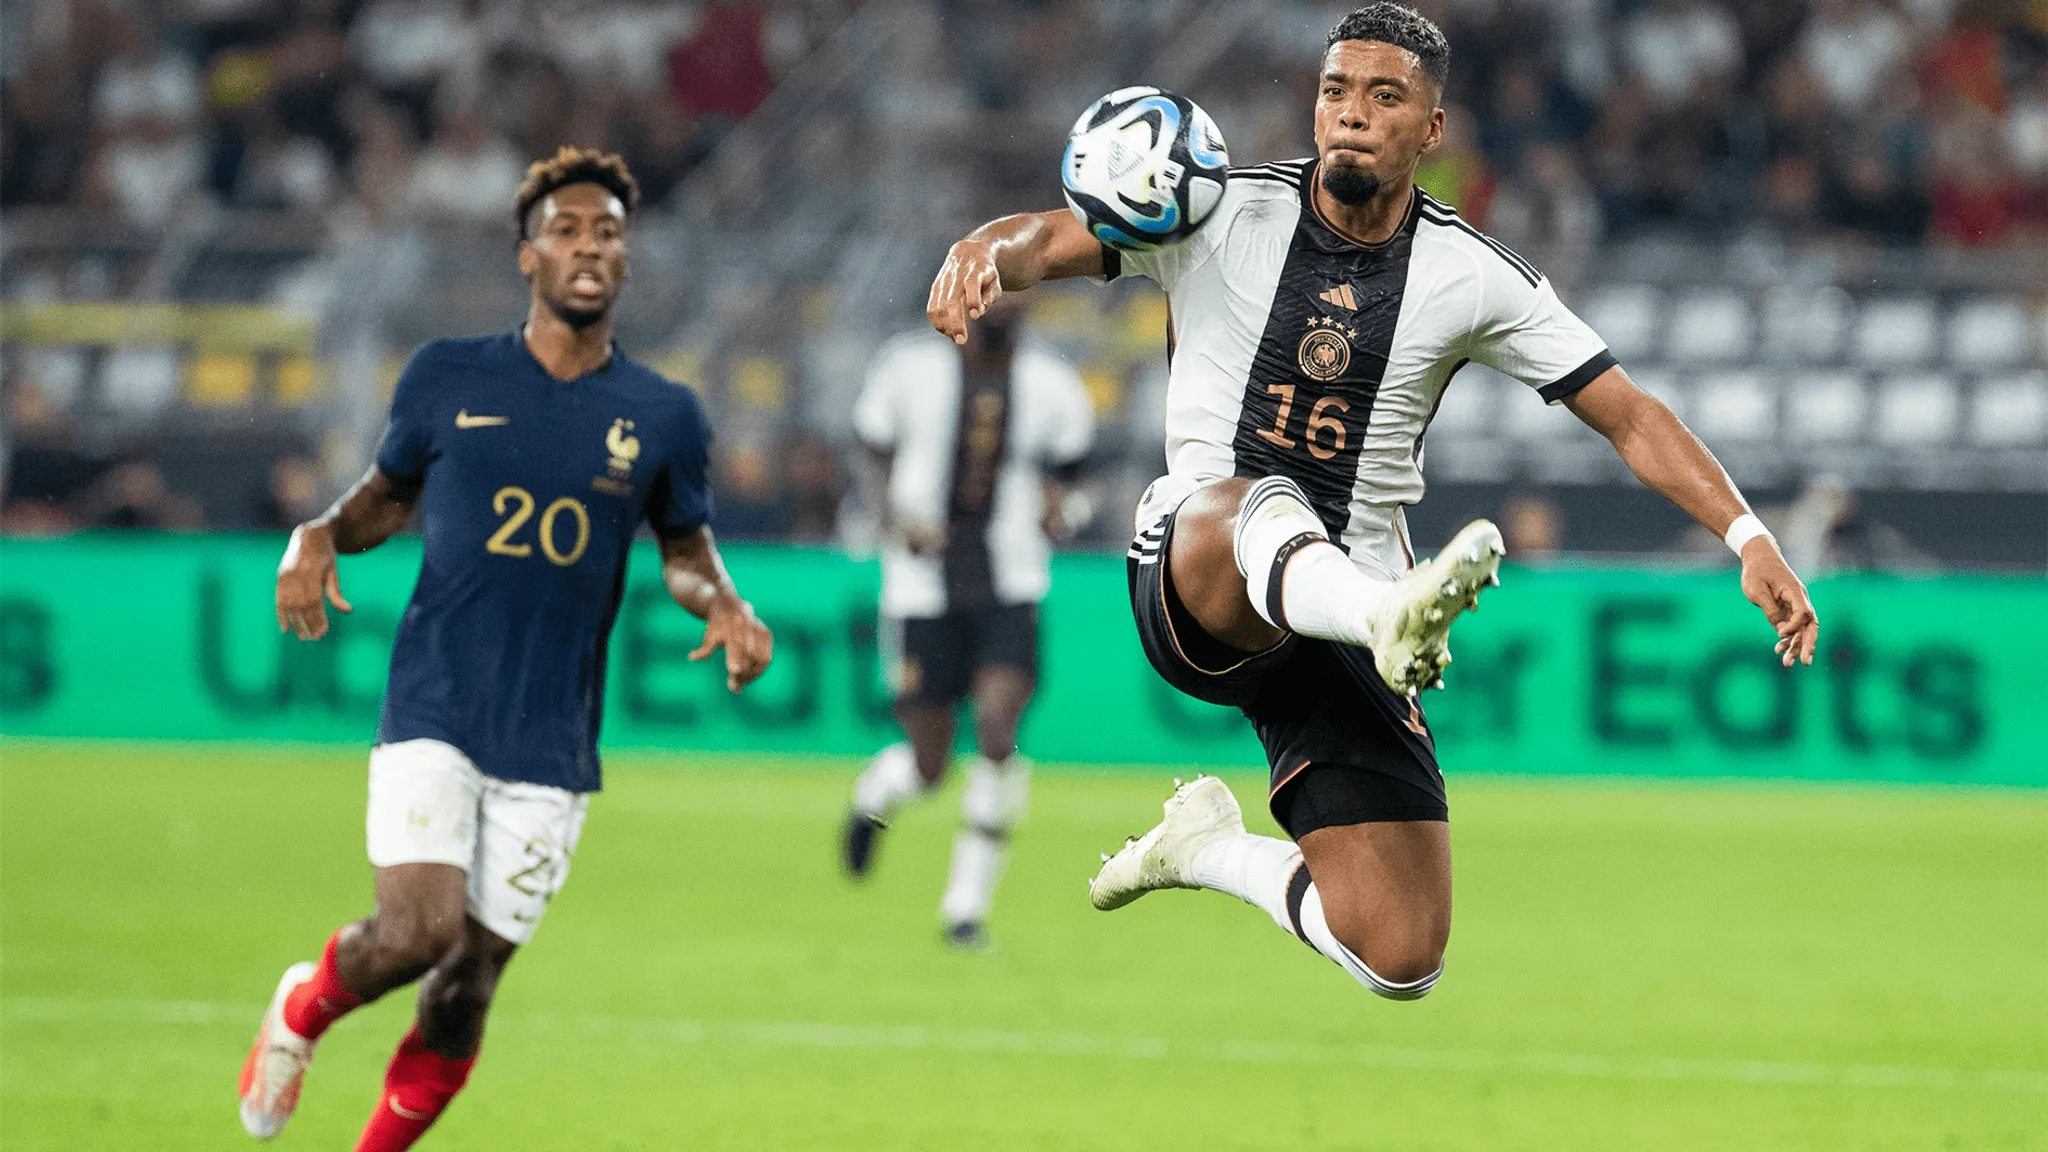 Benjamin Henrichs played in Germany's 2-1 victory over France on Tuesday.